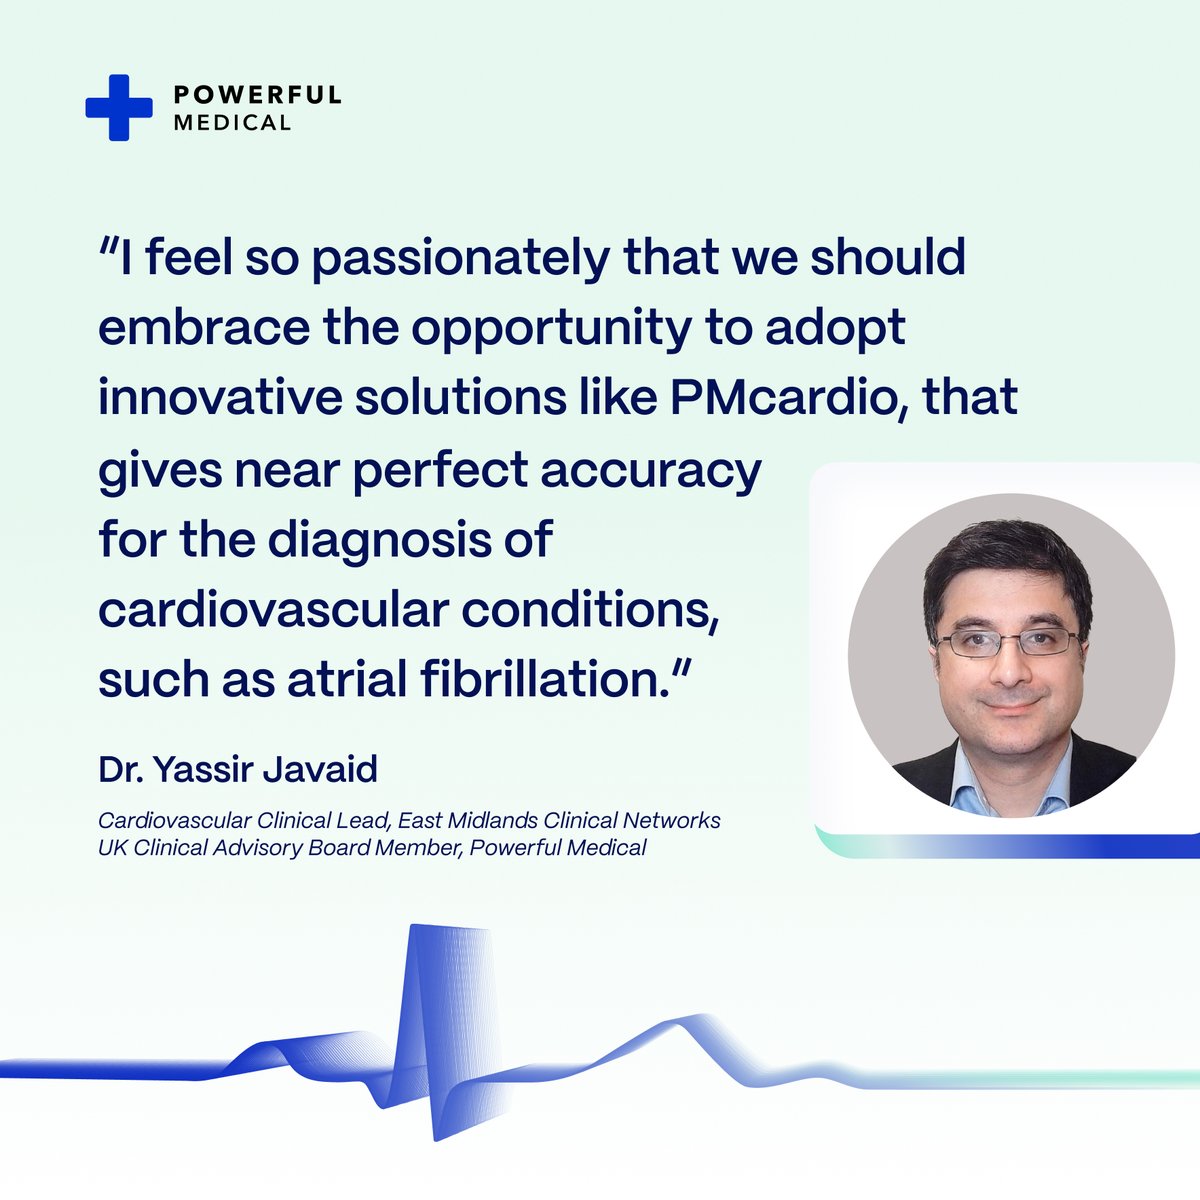 🩺✨ We are delighted to welcome Dr. Yassir Javaid to our UK Scientific Board. 

👨🏻‍⚕️ As a renowned GP specialising in cardiology, he brings an unparalleled depth of knowledge and expertise to our team. 

#PowerfulMedical #PMcardio #AIinHealthcare #MedTech #Cardiology